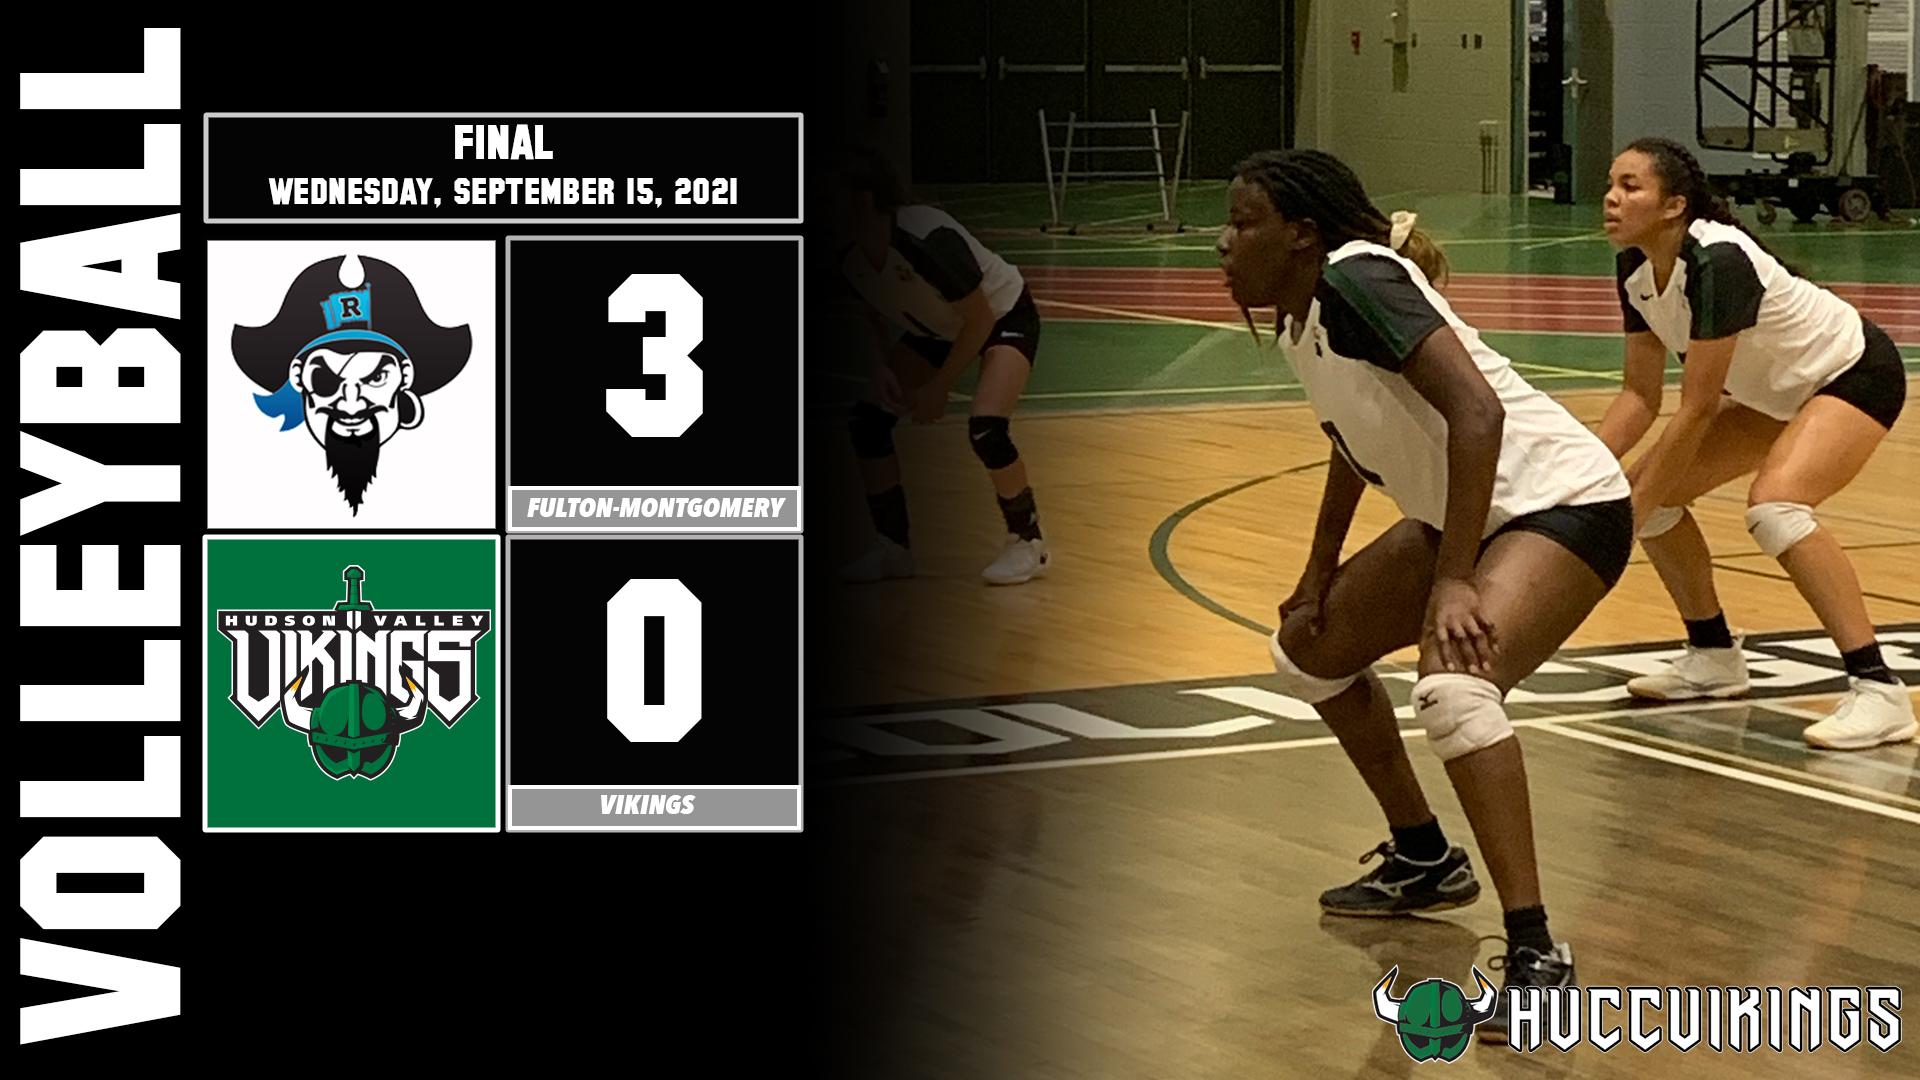 FMCC defeats HVCC in volleyball (3-0)